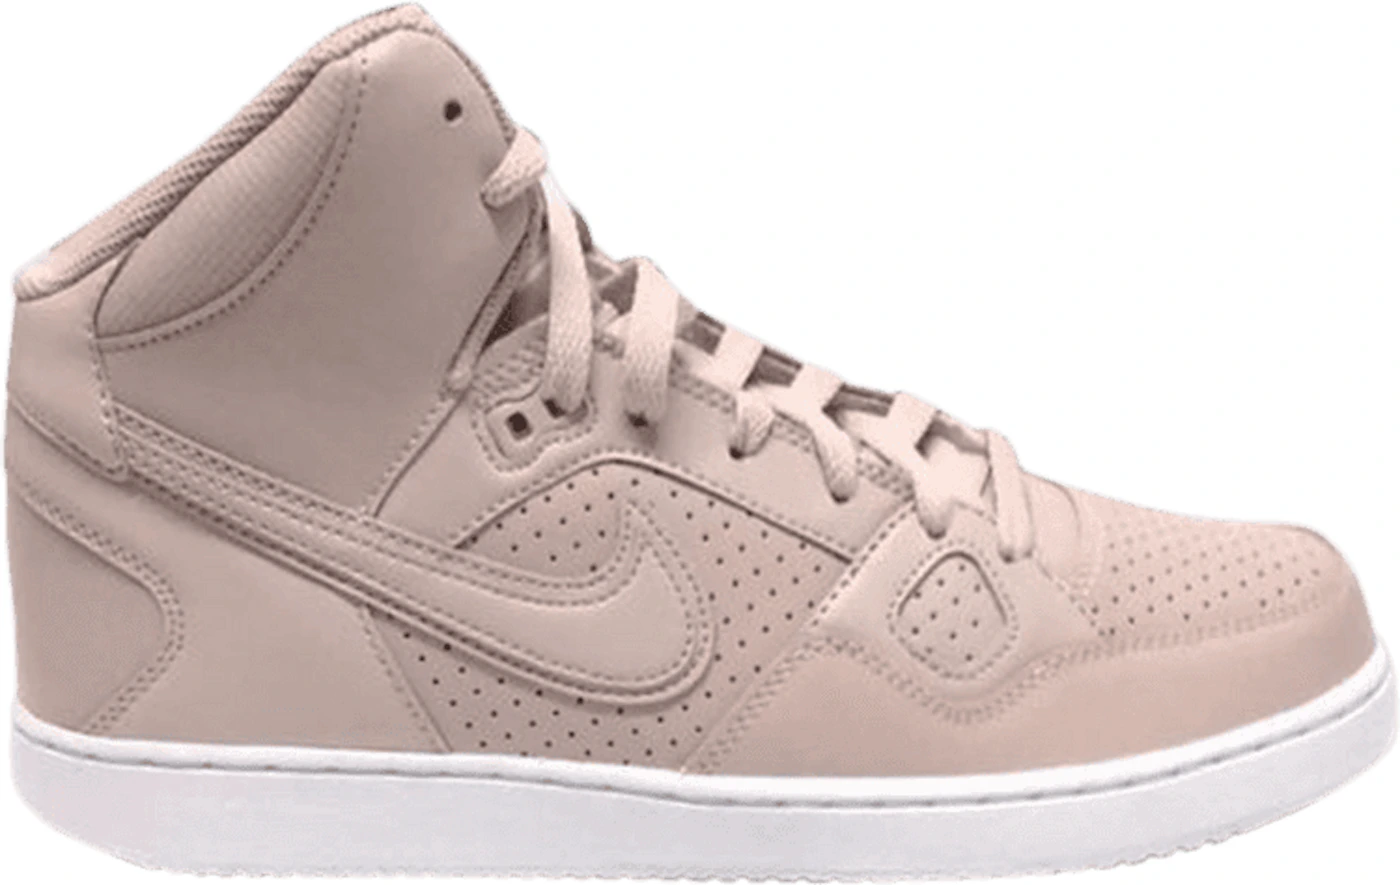 Ban Toevlucht verlangen Nike Son Of Force Mid Particle Rose (Women's) - 616303-603 - US